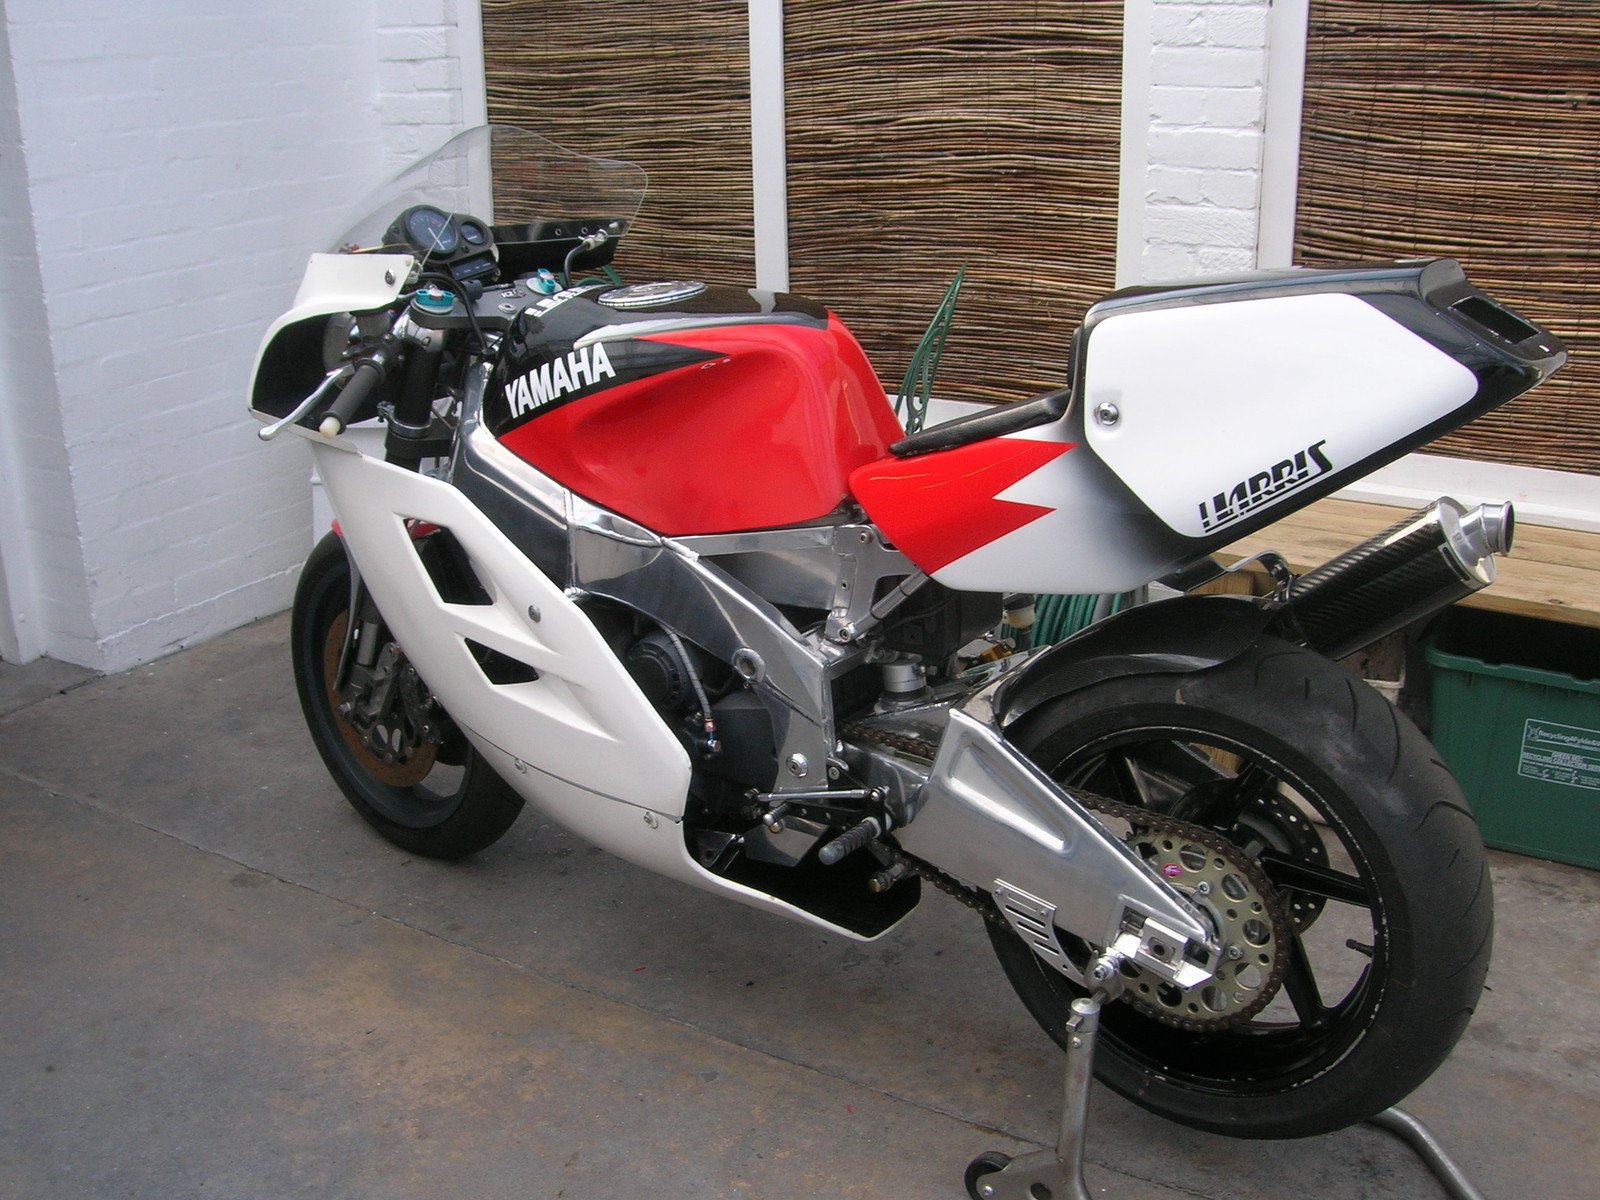 851 Archives - Page 2 of 13 - Rare SportBikes For Sale